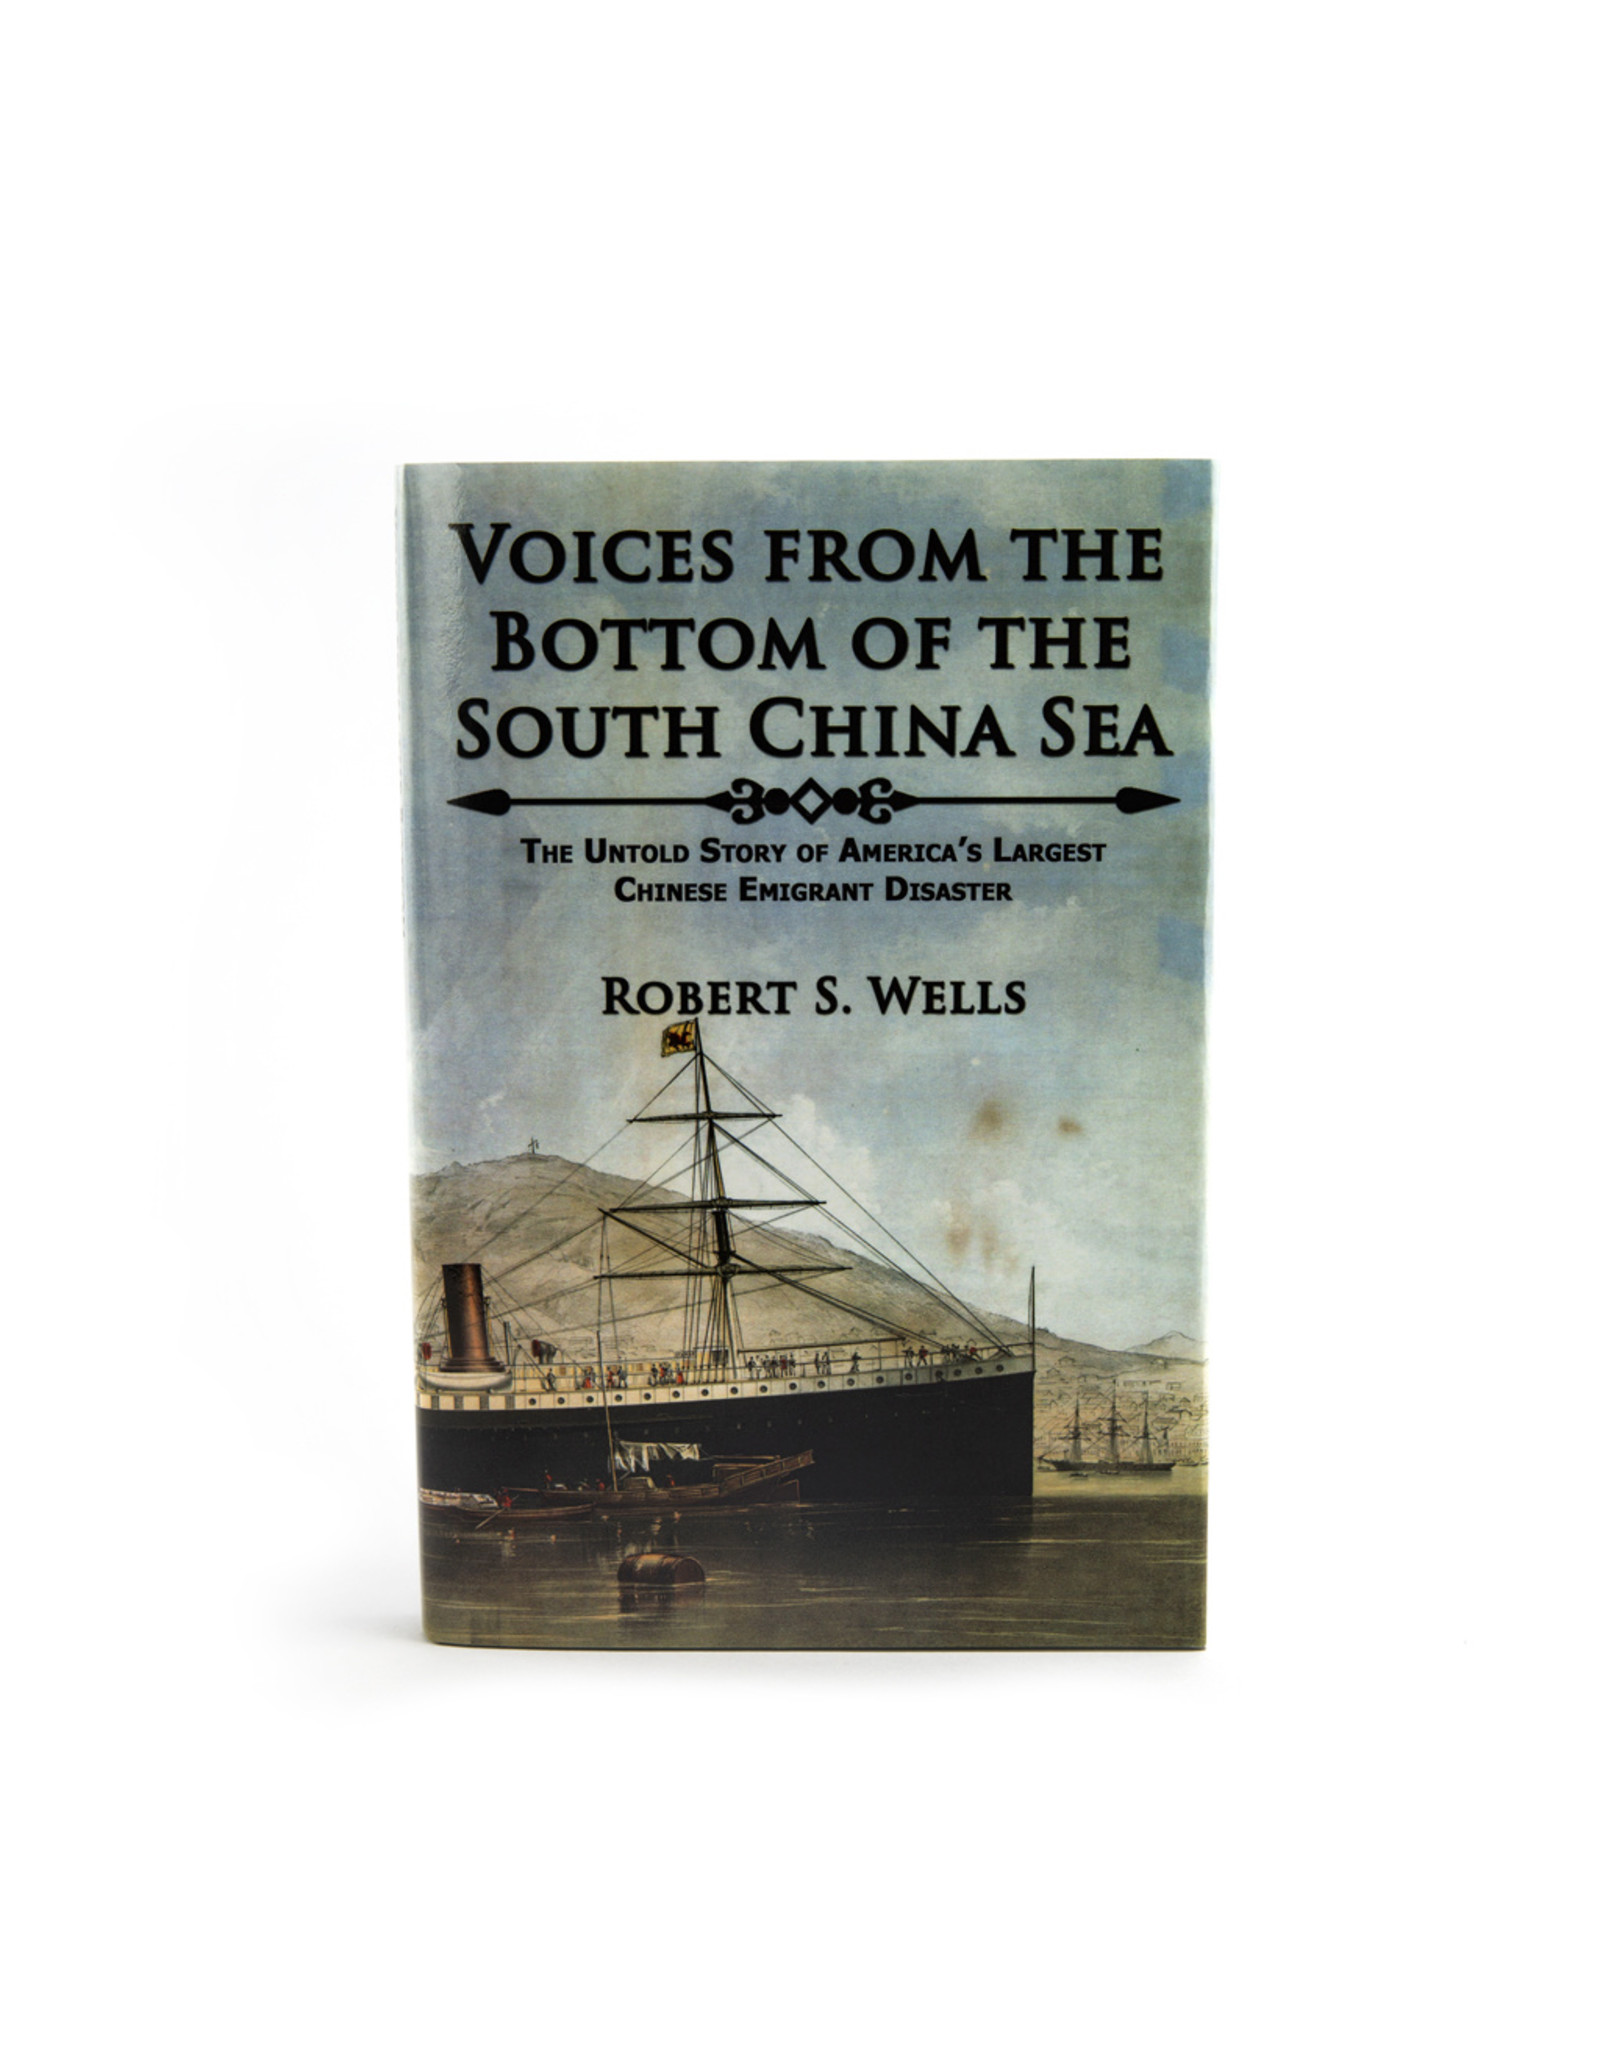 Voices from the Bottom of the South China Sea, Robert Wells